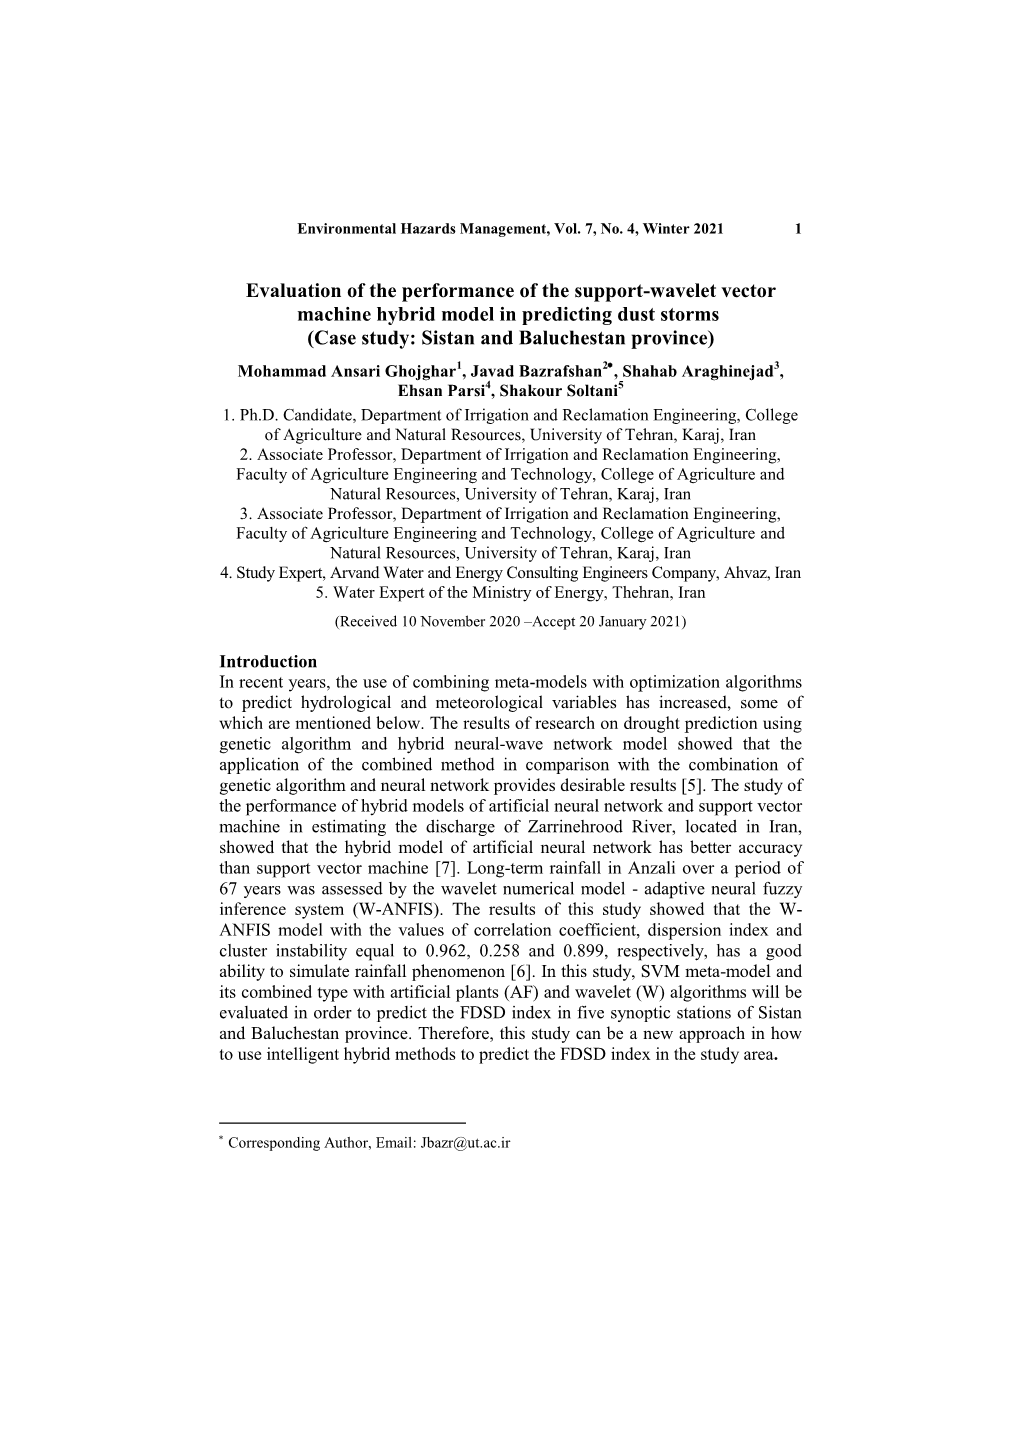 Evaluation of the Performance of the Support-Wavelet Vector Machine